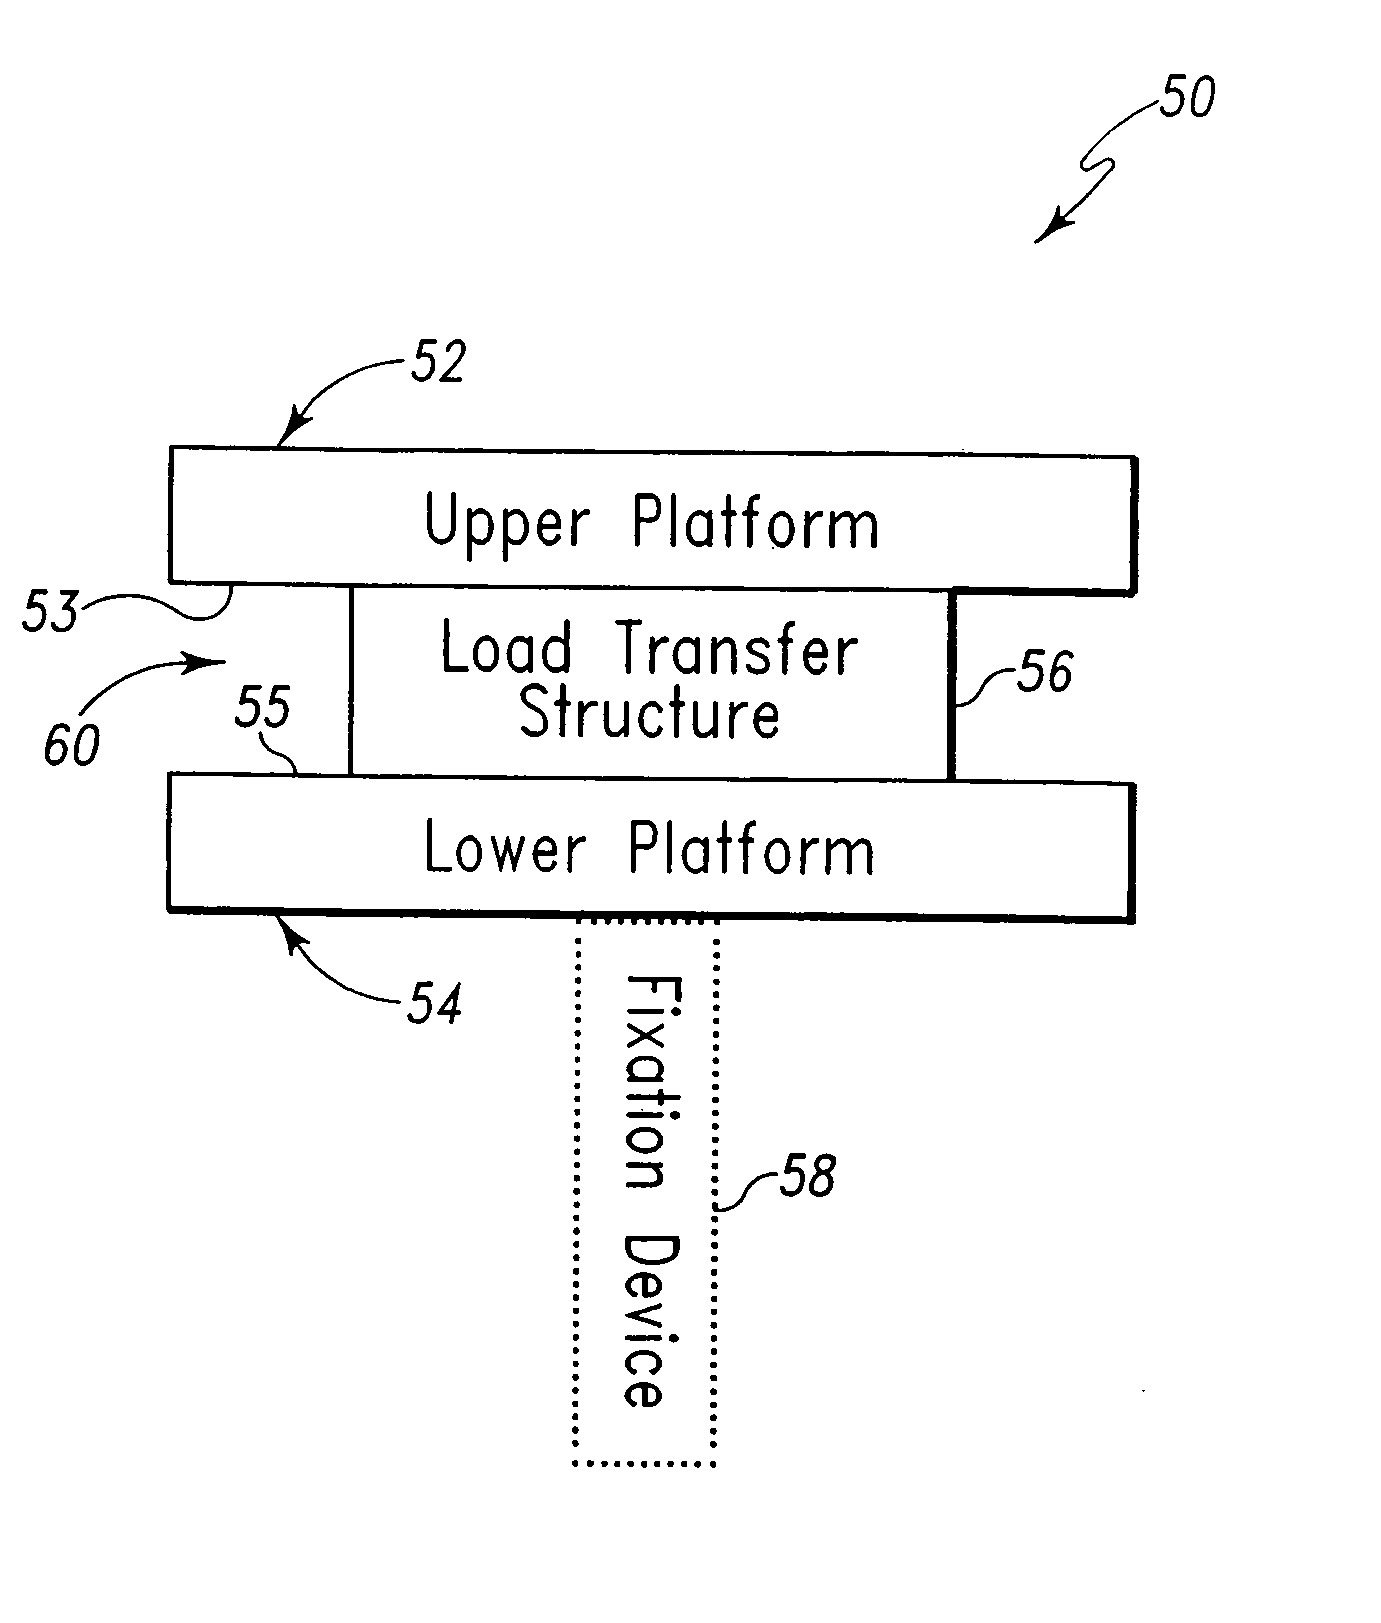 Implant device for cartilage regeneration in load bearing articulation regions